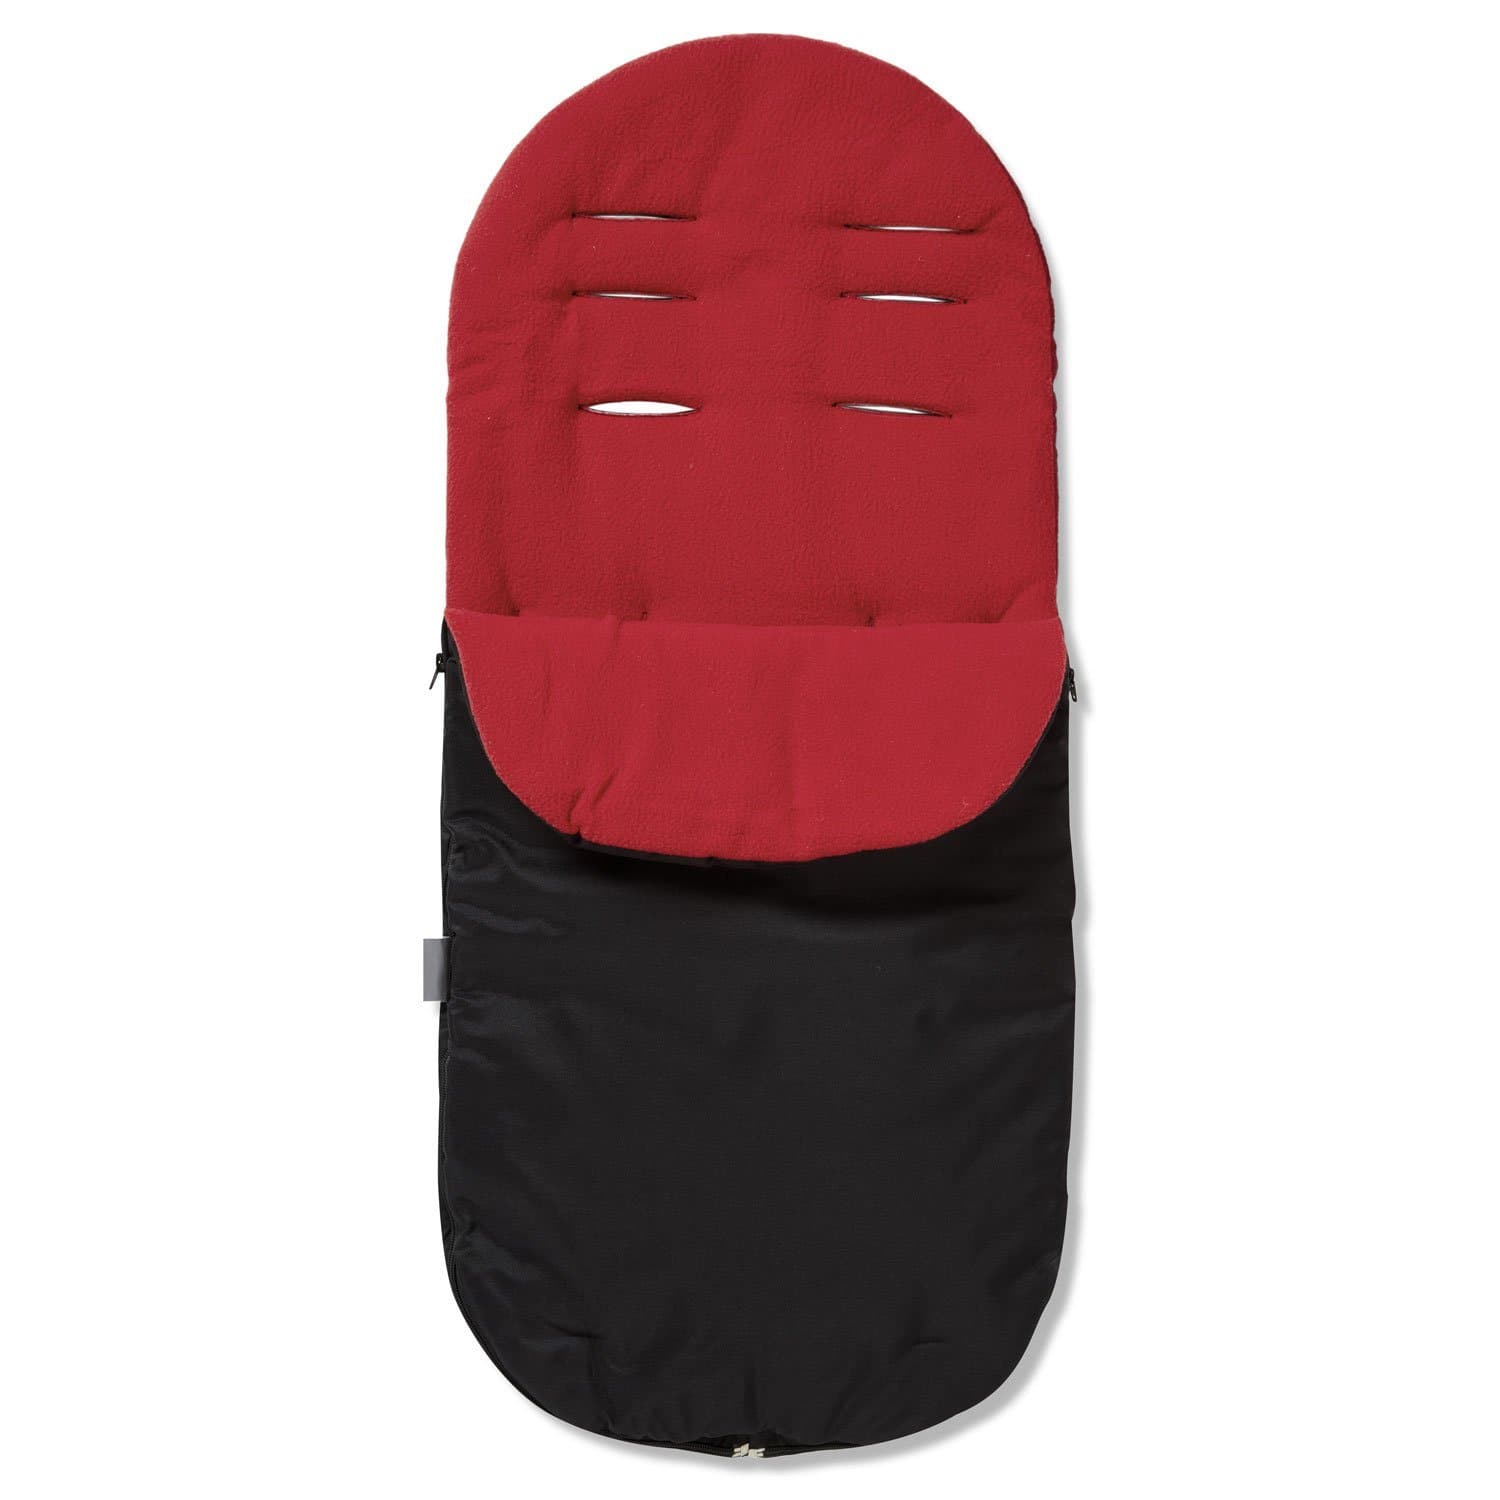 Footmuff / Cosy Toes Compatible with Maxi Cosi - Red / Fits All Models | For Your Little One